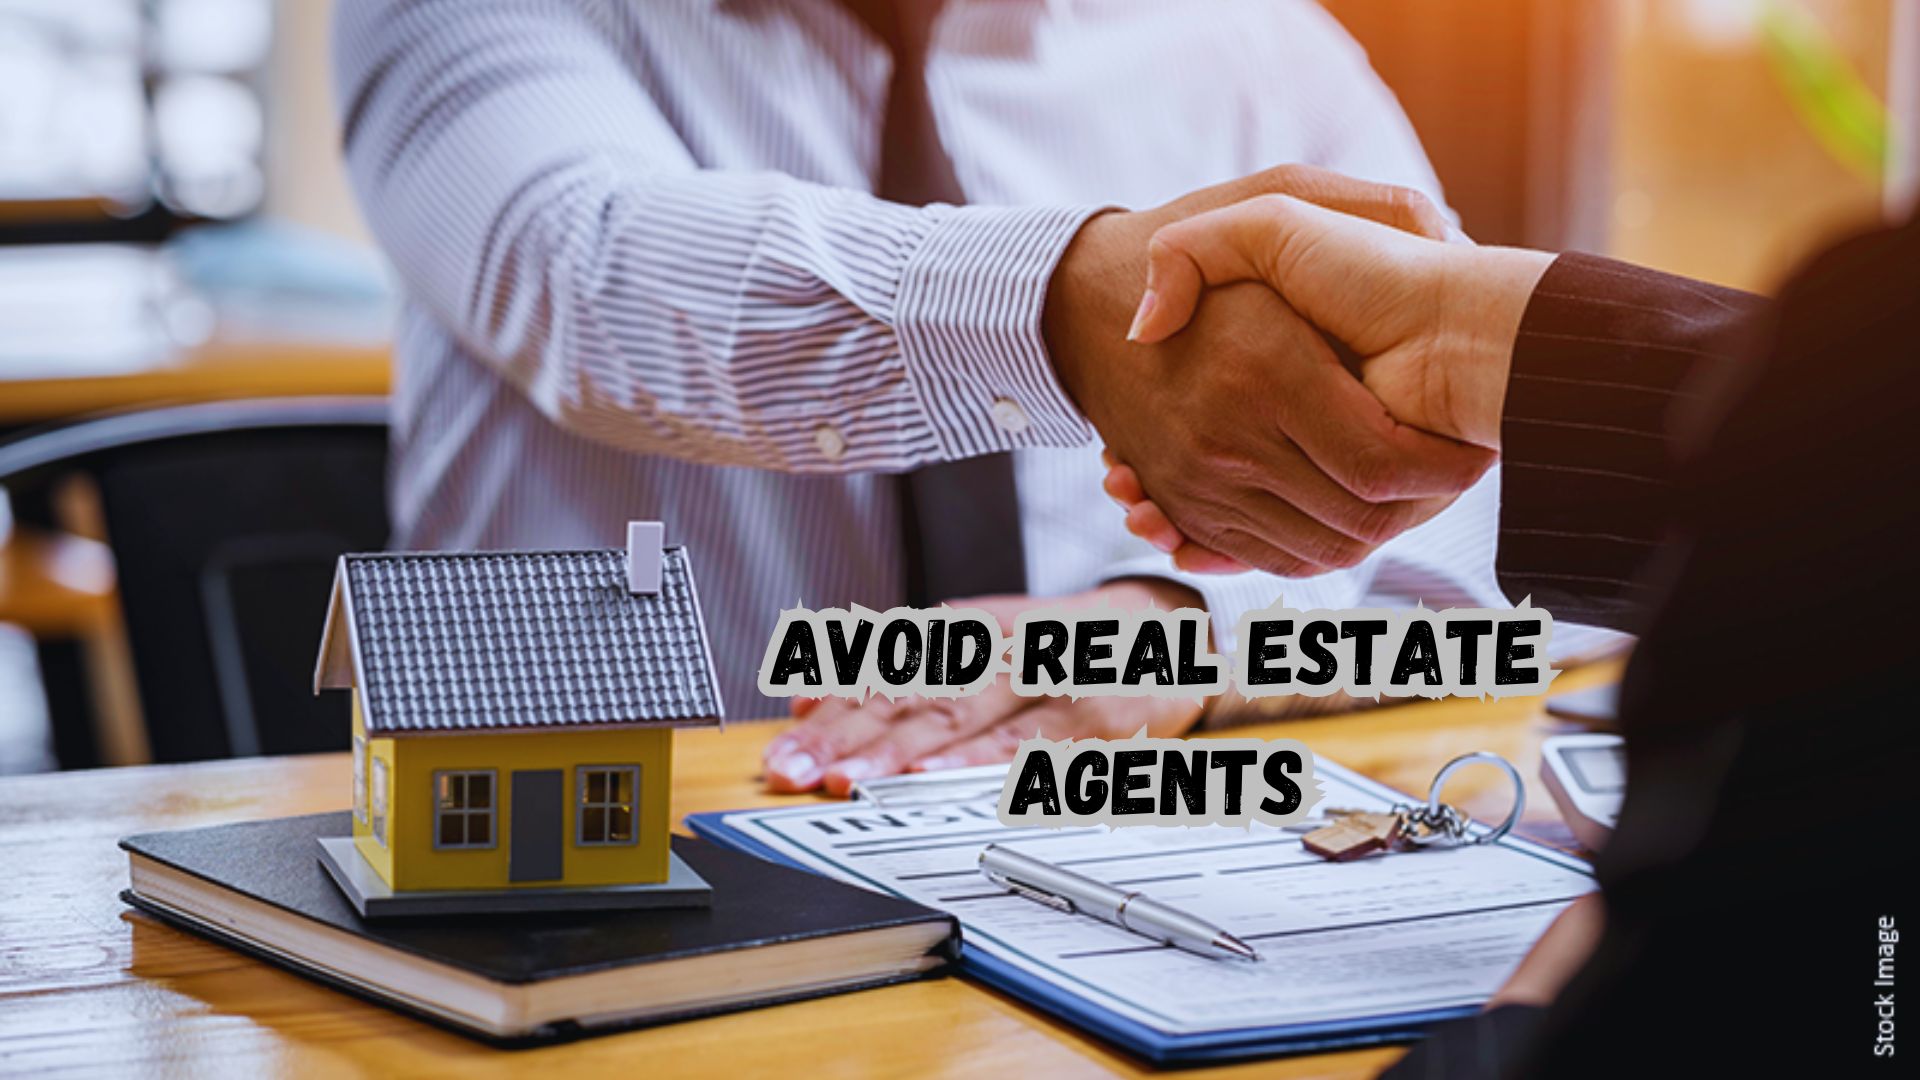 Avoid Real Estate Agents.